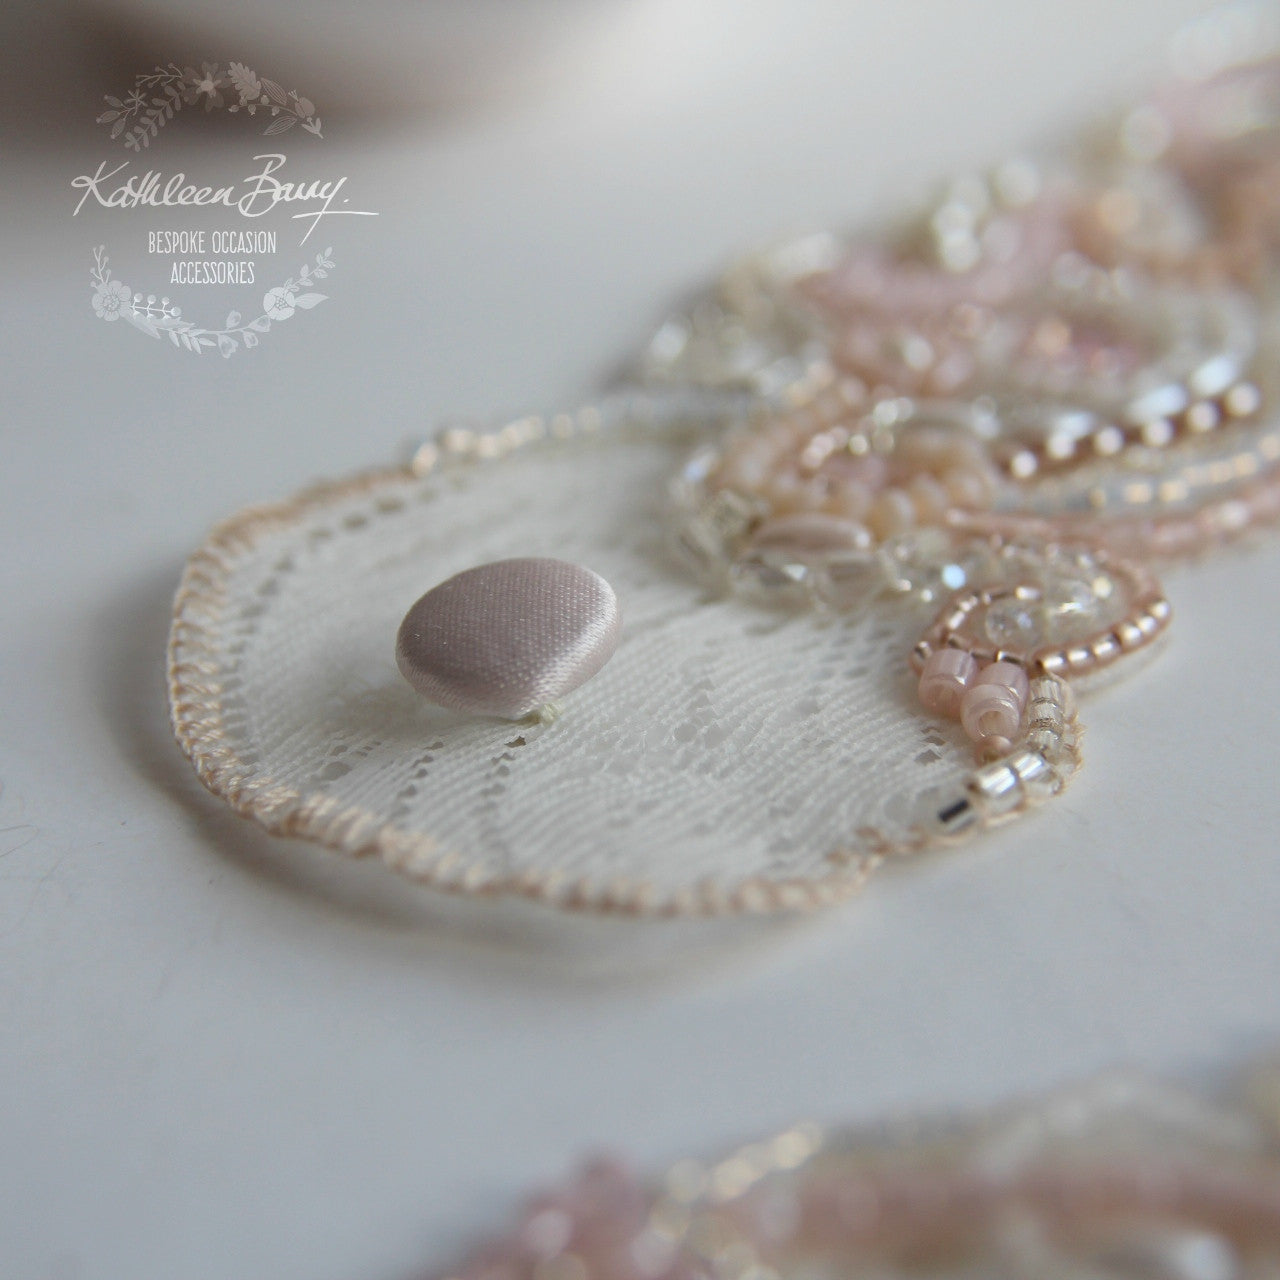 Bridal cuff bracelet lace crystal pearl  - ivory & shades of pink / blush pink